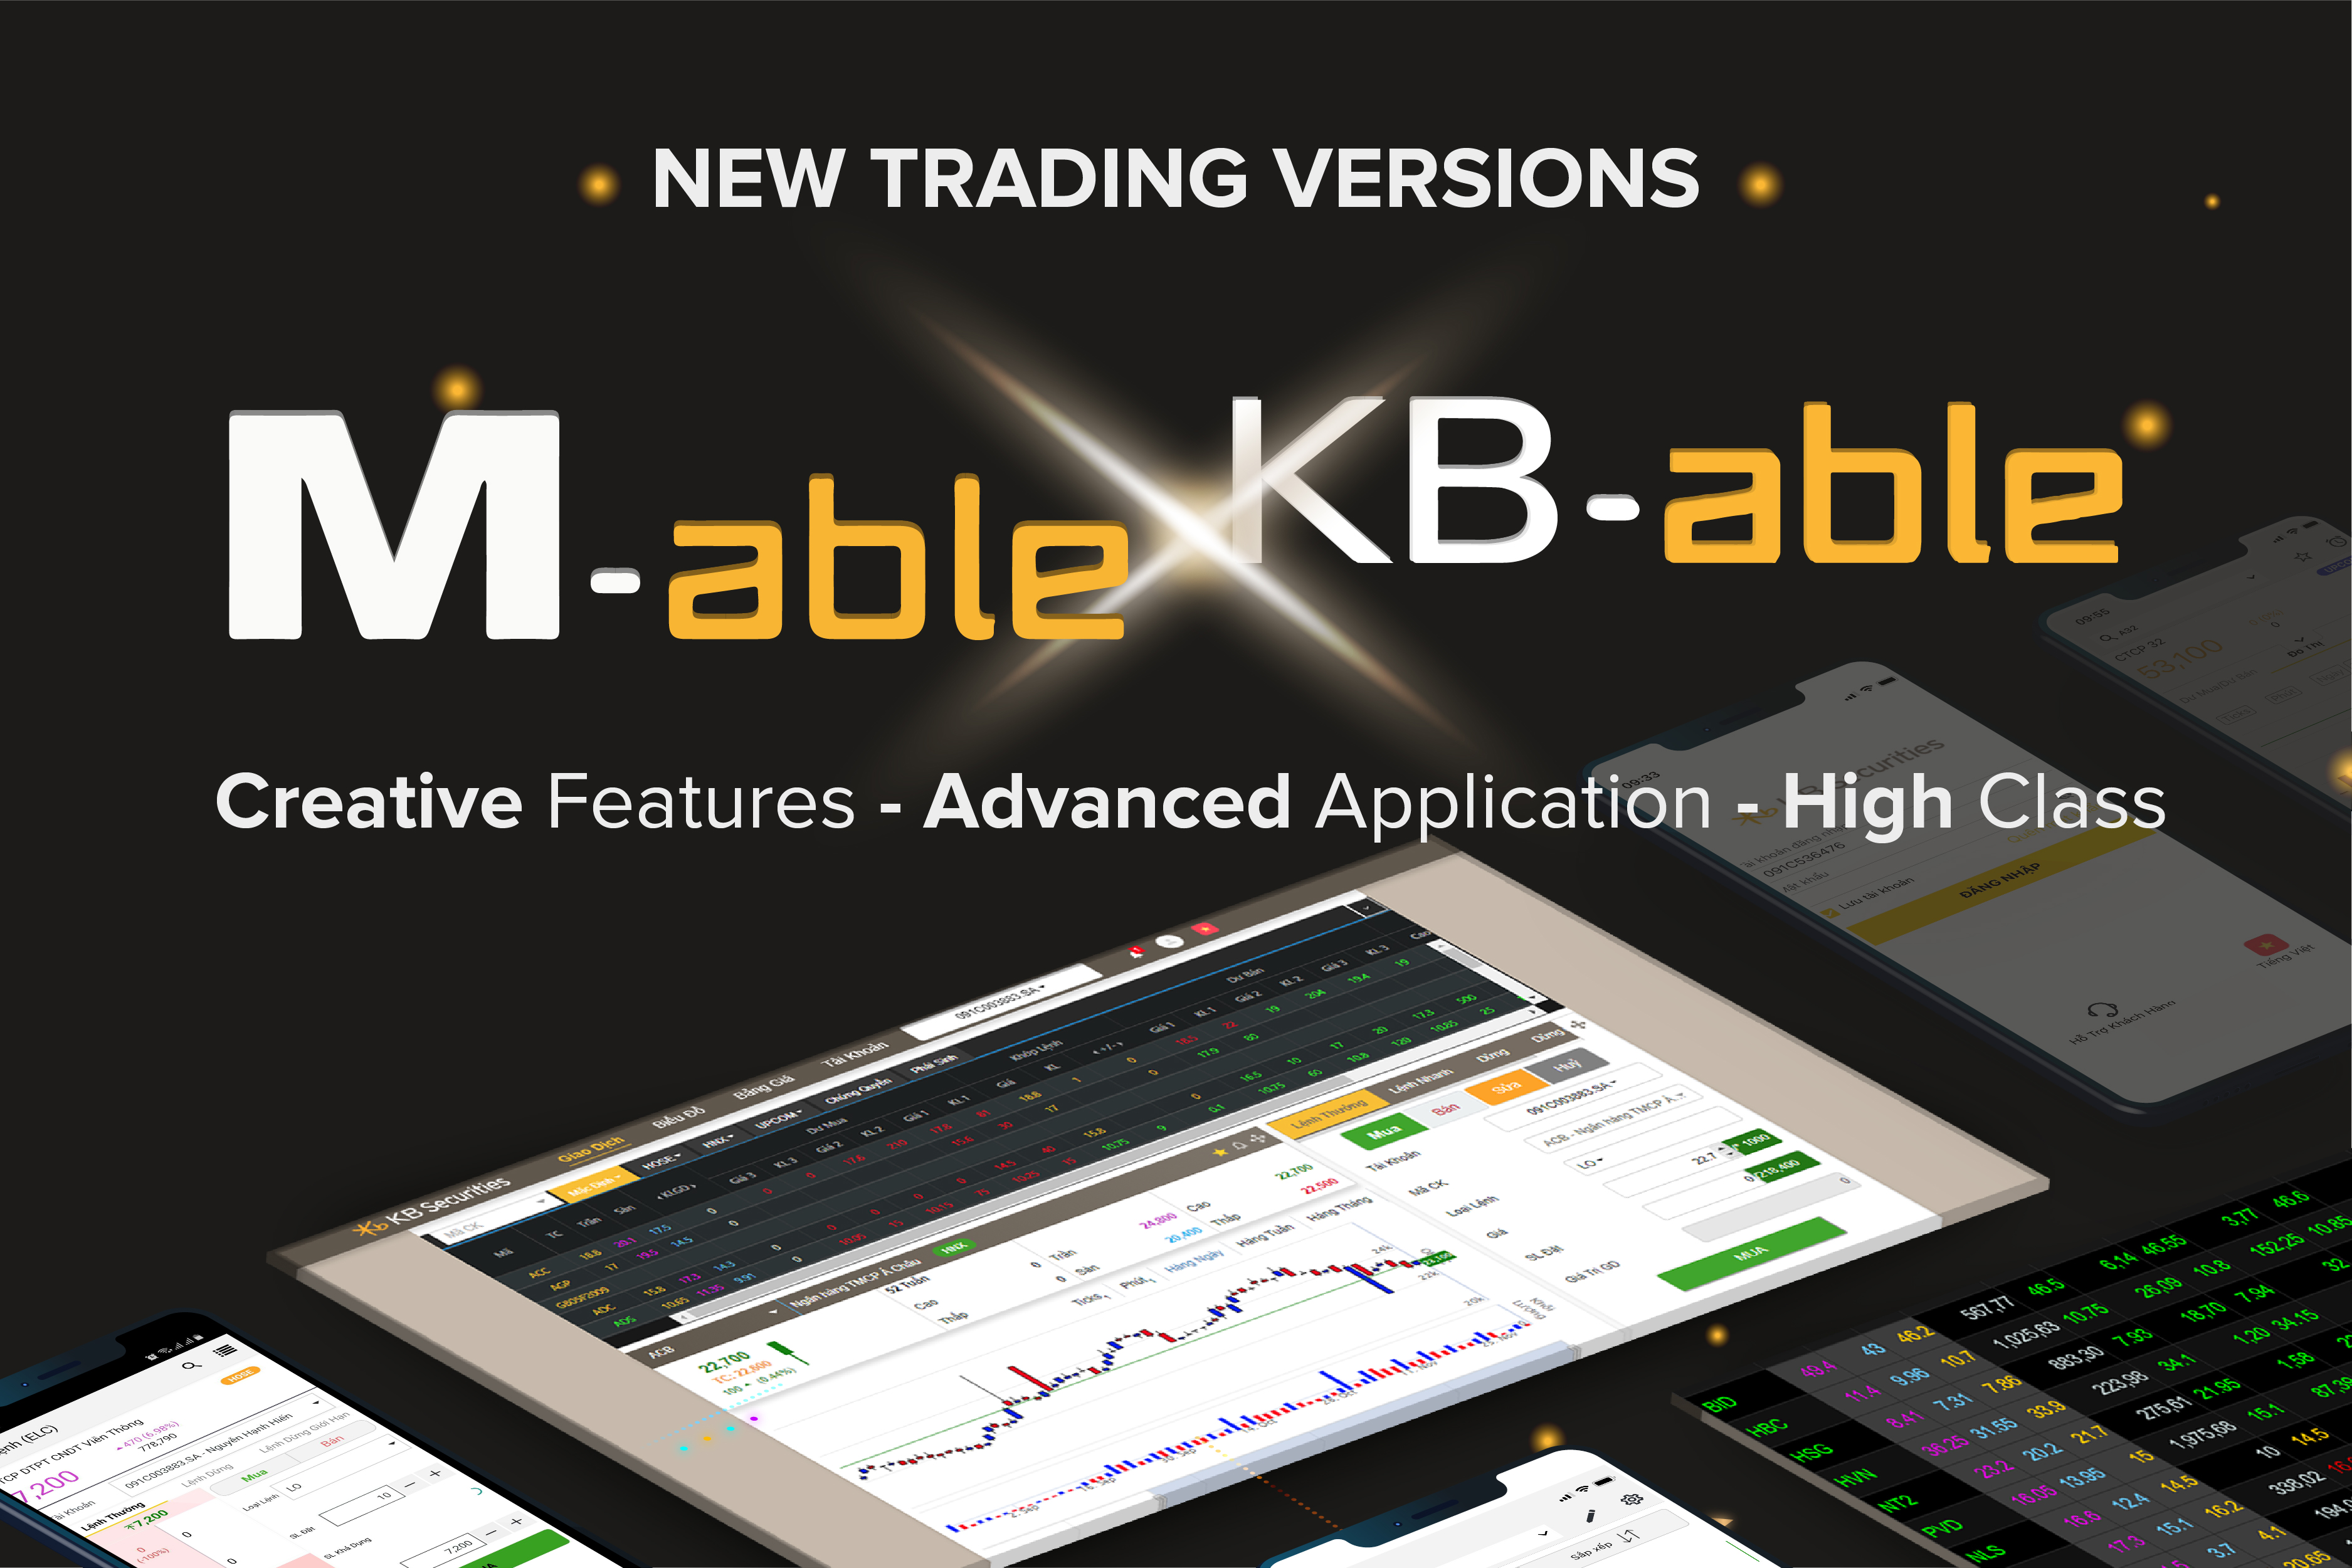 KB-able & M-able Trading Channels